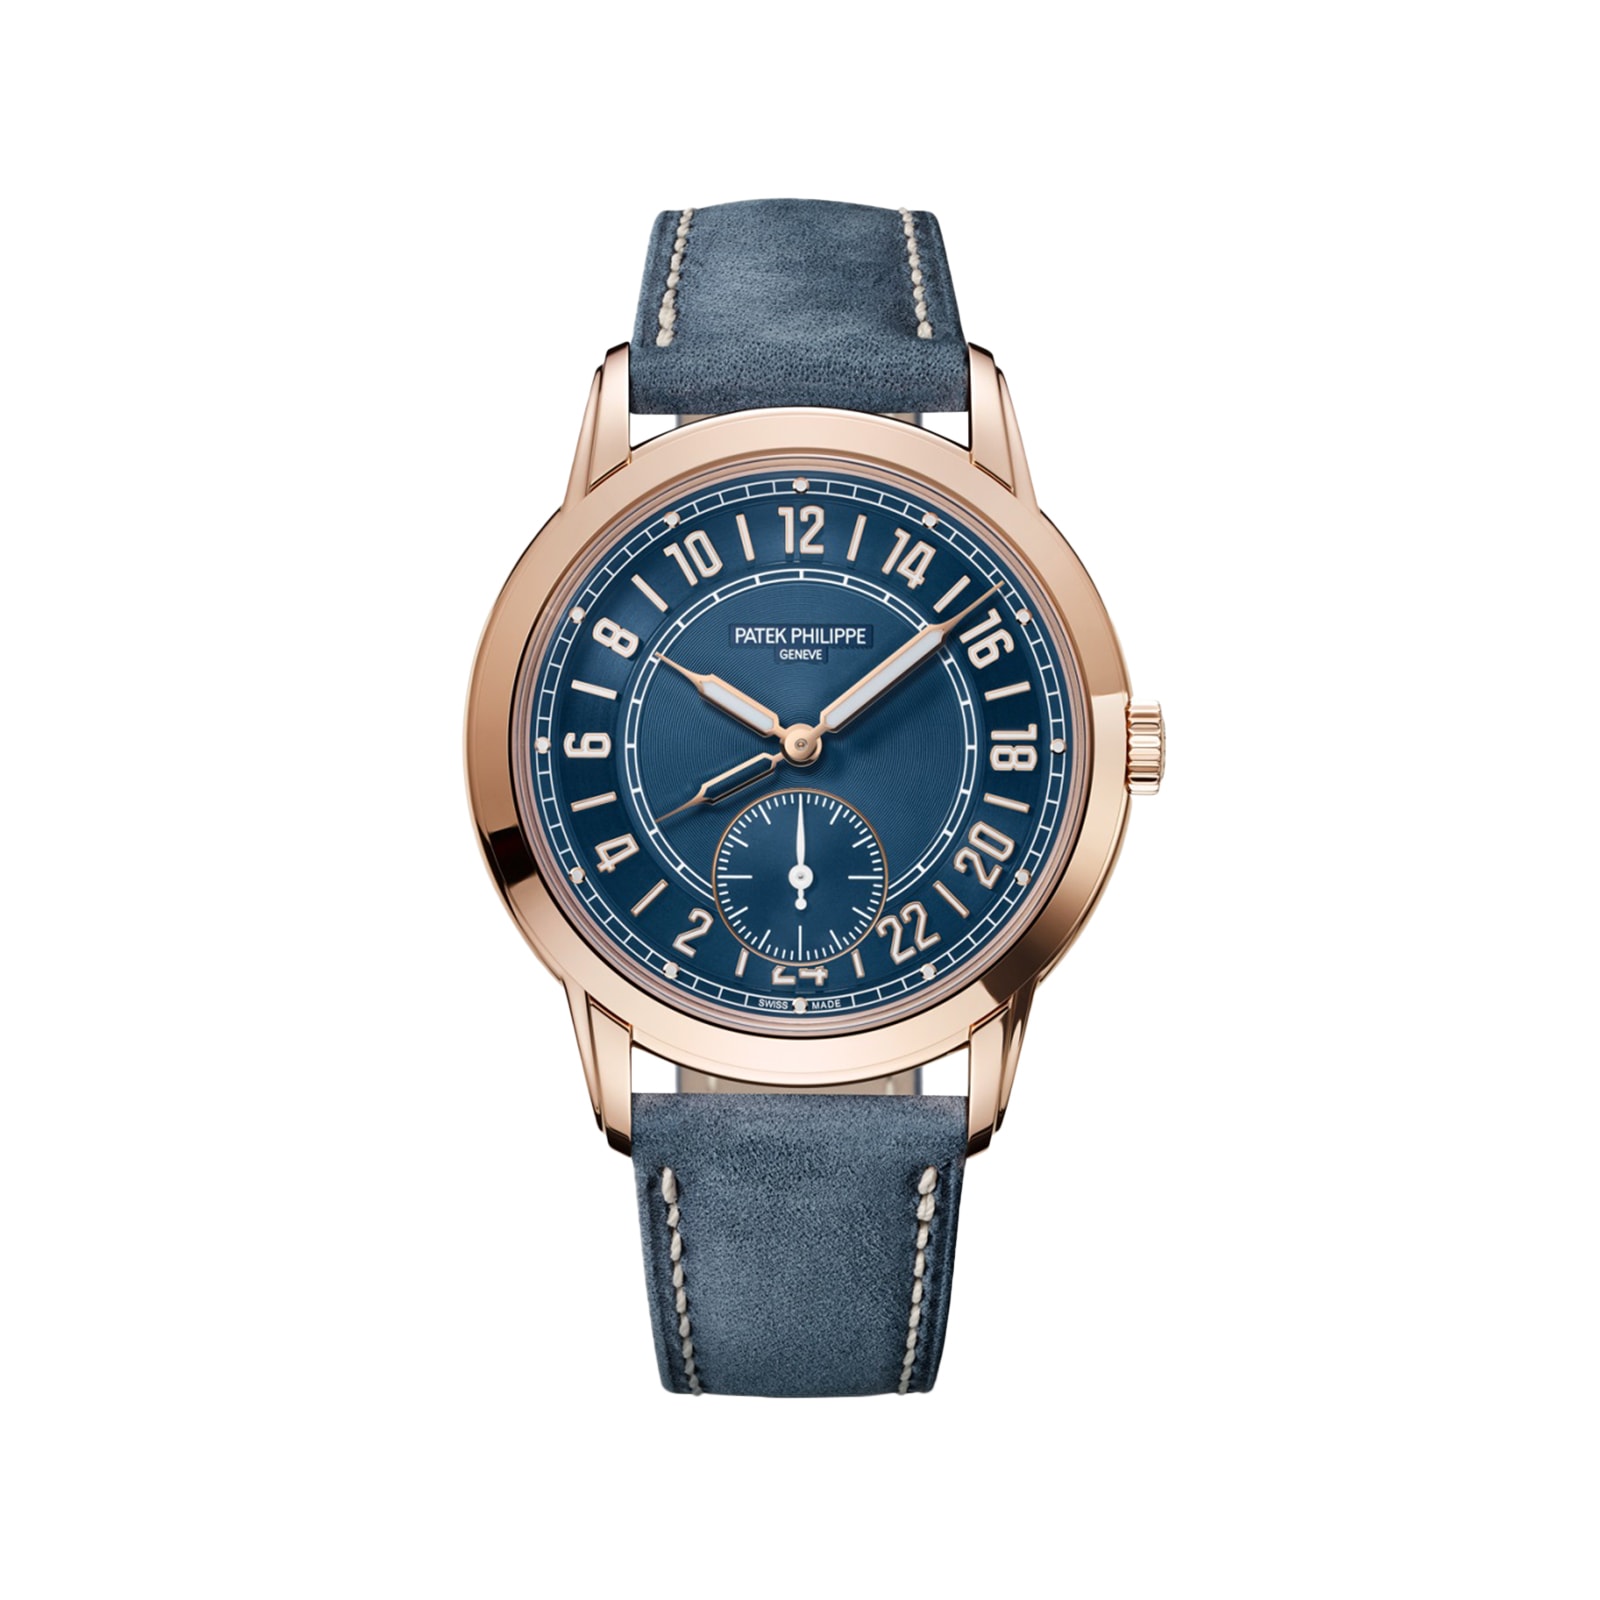 Patek Philippe World Timer Sells for a Record-Breaking $7.8 Million